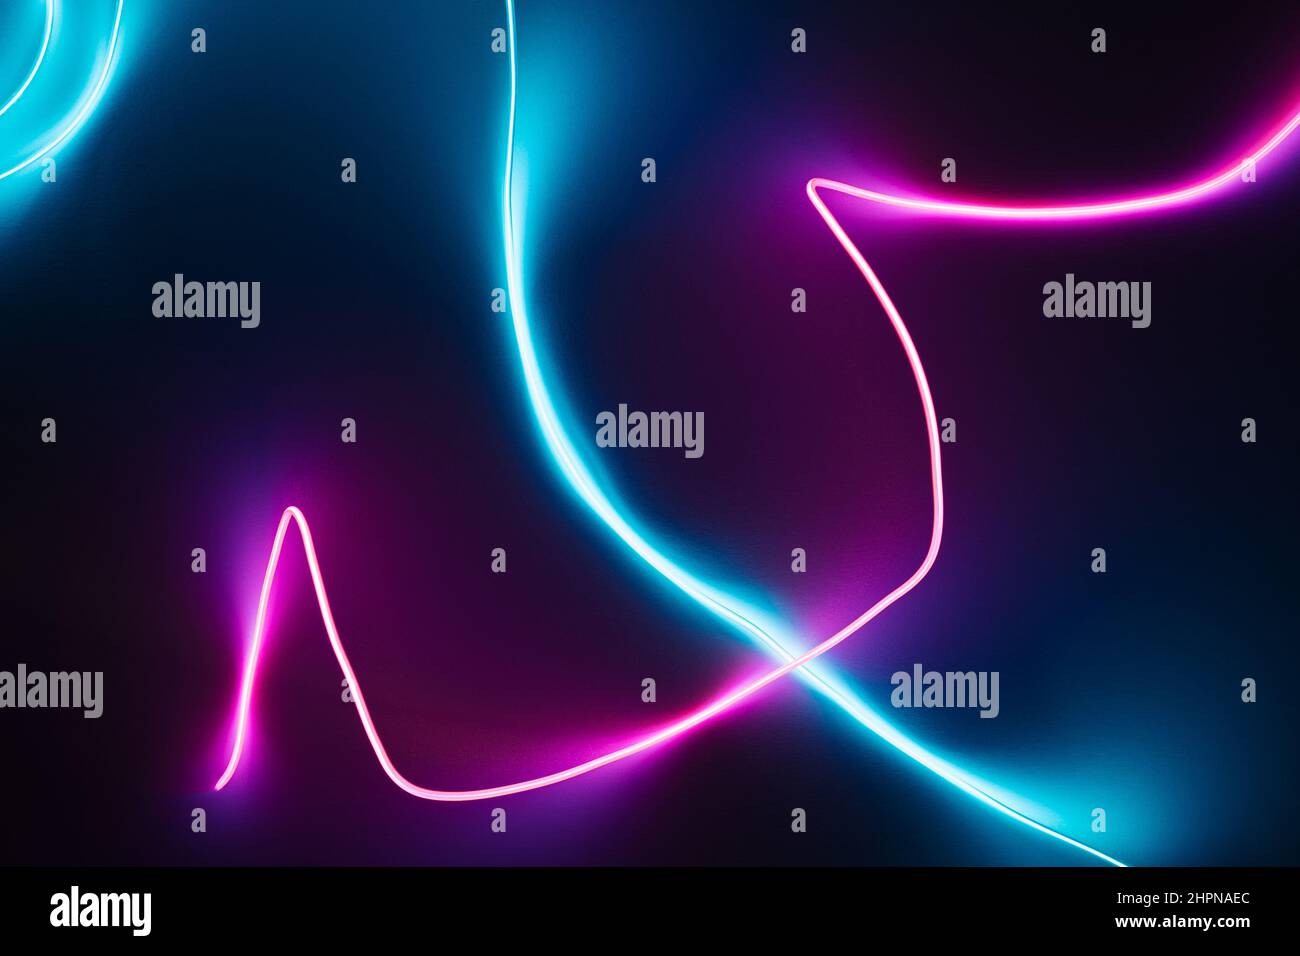 Neon blue and pink led lines on a dark night background. Cyberpunk futuristic wallpaper. Stock Photo